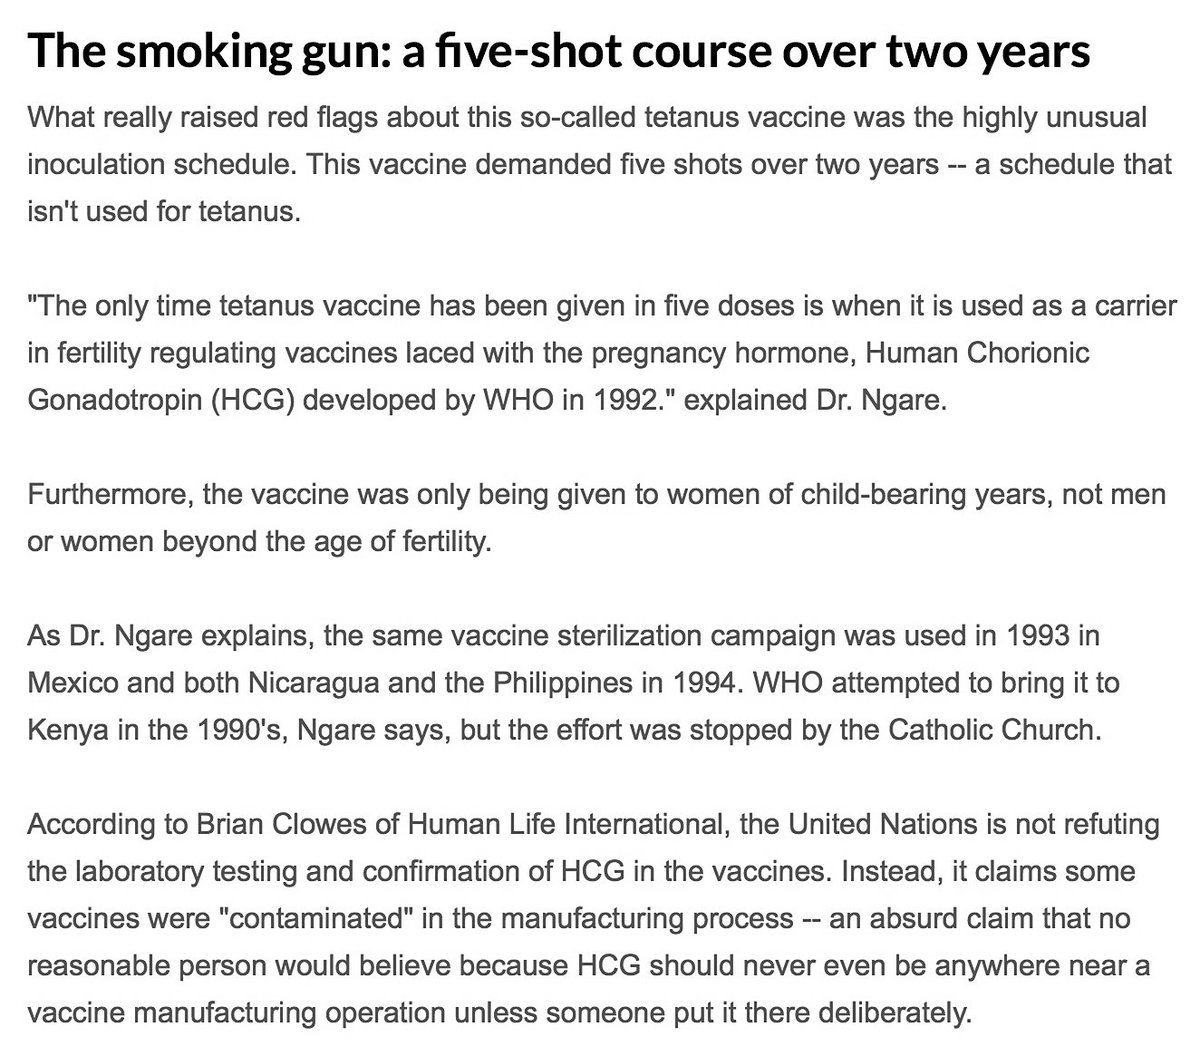 Tetanus Vaccines Given To Millions Of Young Women In Kenya Have Been Confirmed By Laboratories To Contain A Sterilization Chemical That Causes Miscarriages. Vaccines Was Pushed By UNICEF And The World Health Organization.November 8, 2014. https://www.naturalnews.com/047571_vaccines_sterilization_genocide.html #QAnon  @potus